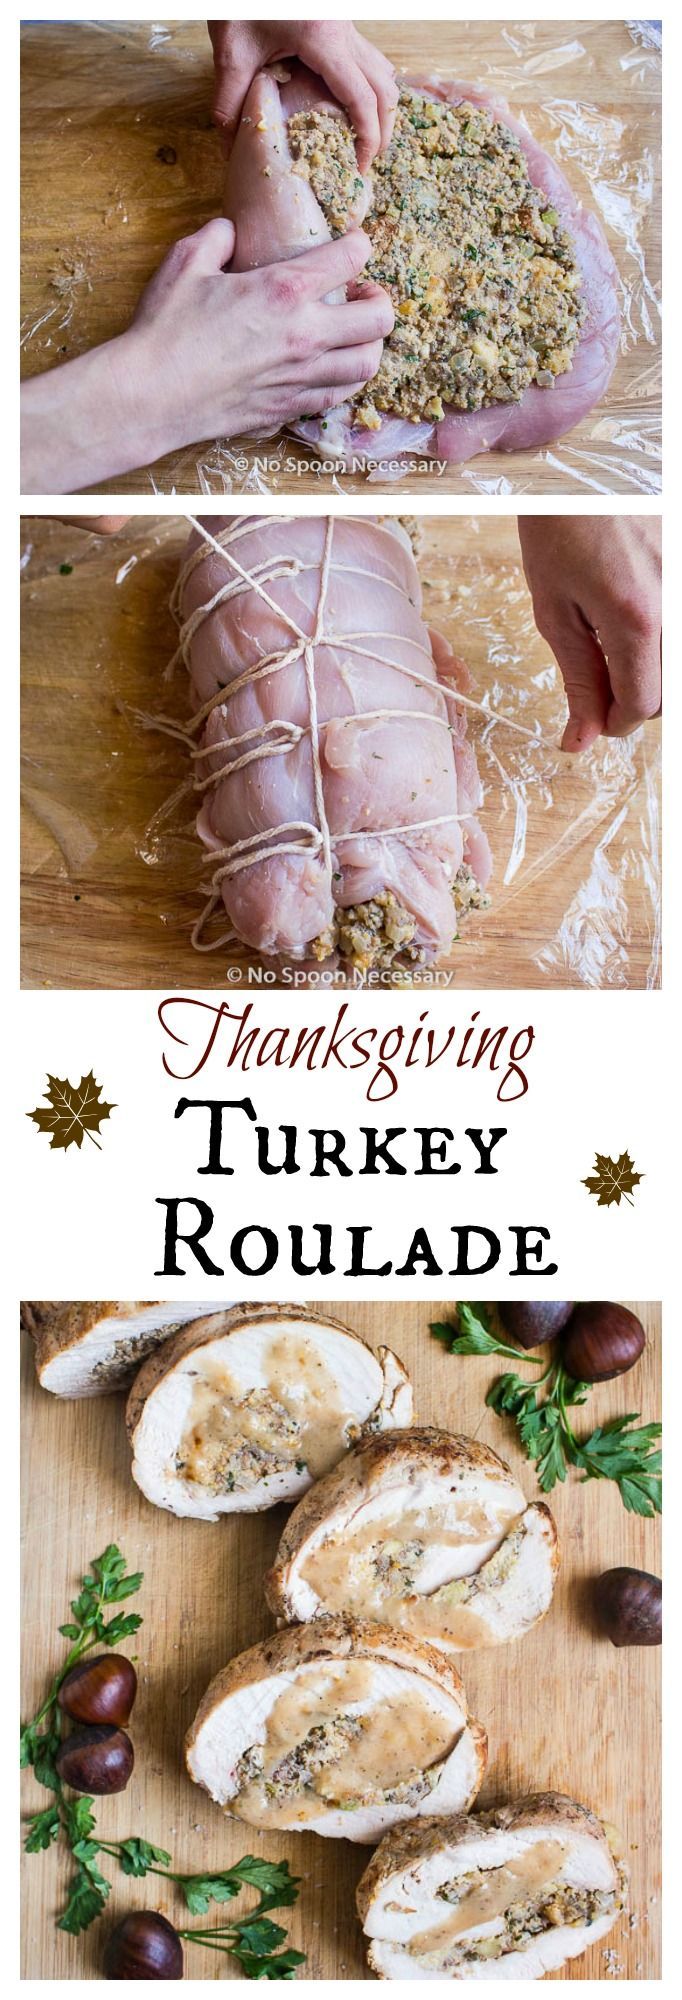 Thanksgiving Turkey Roulade- Skip the Stress and Do the Turkey & Stuffing in E